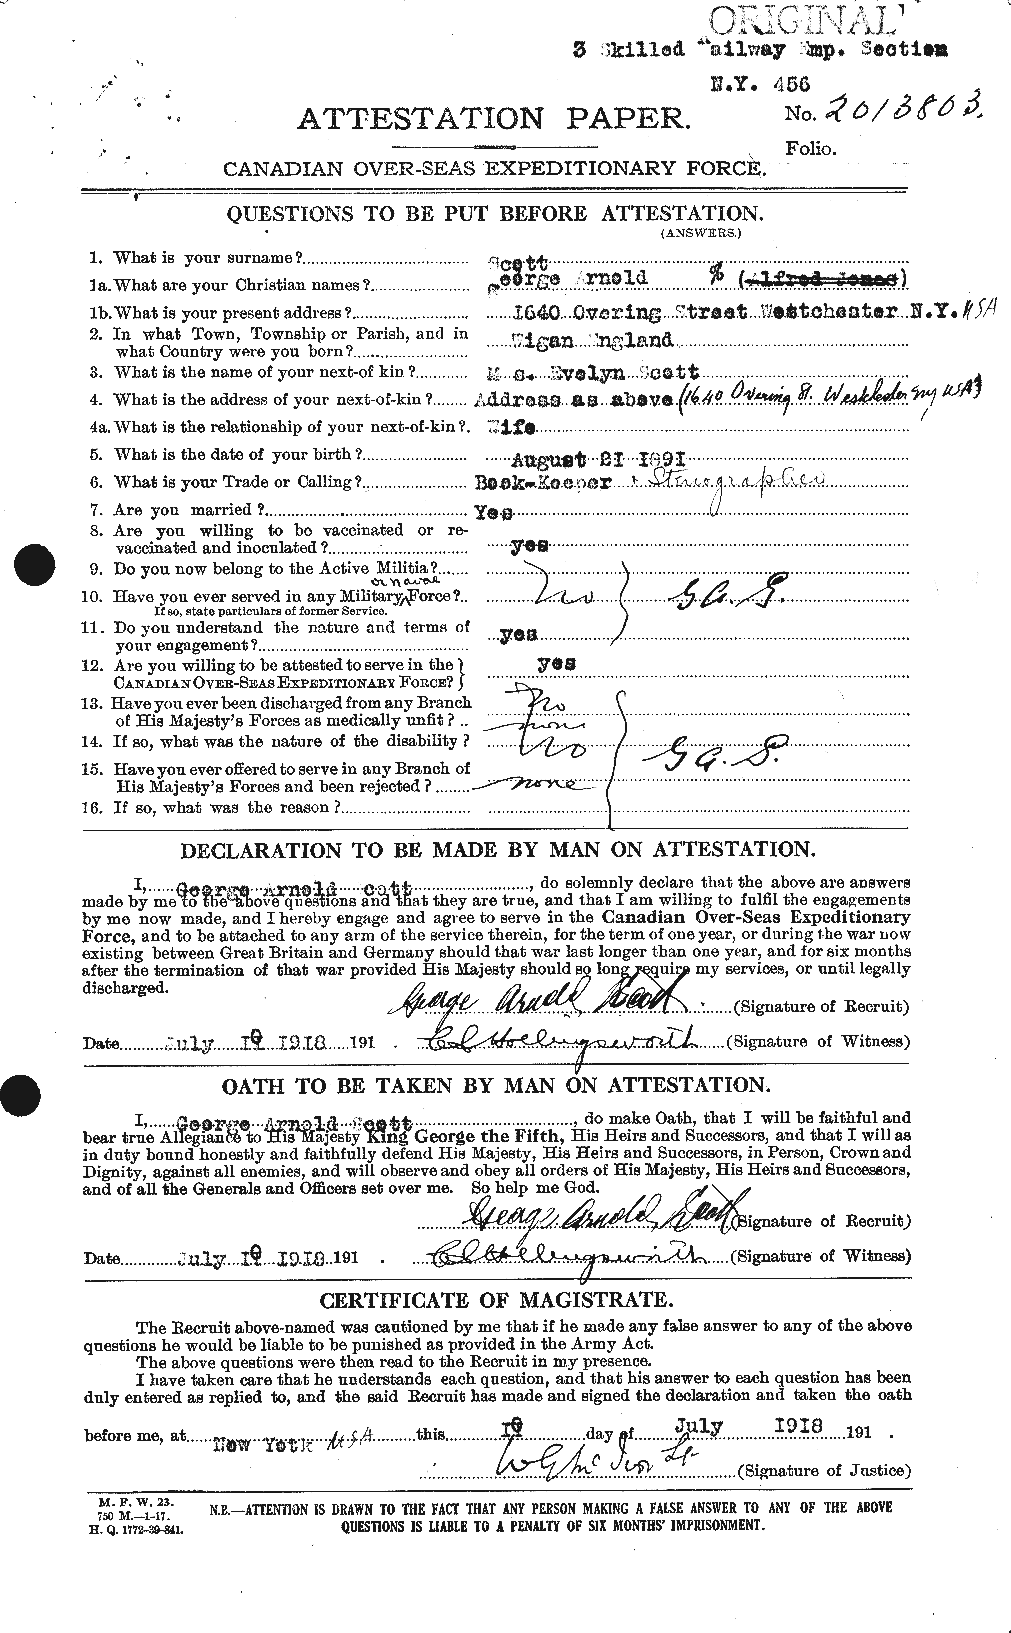 Personnel Records of the First World War - CEF 083574a